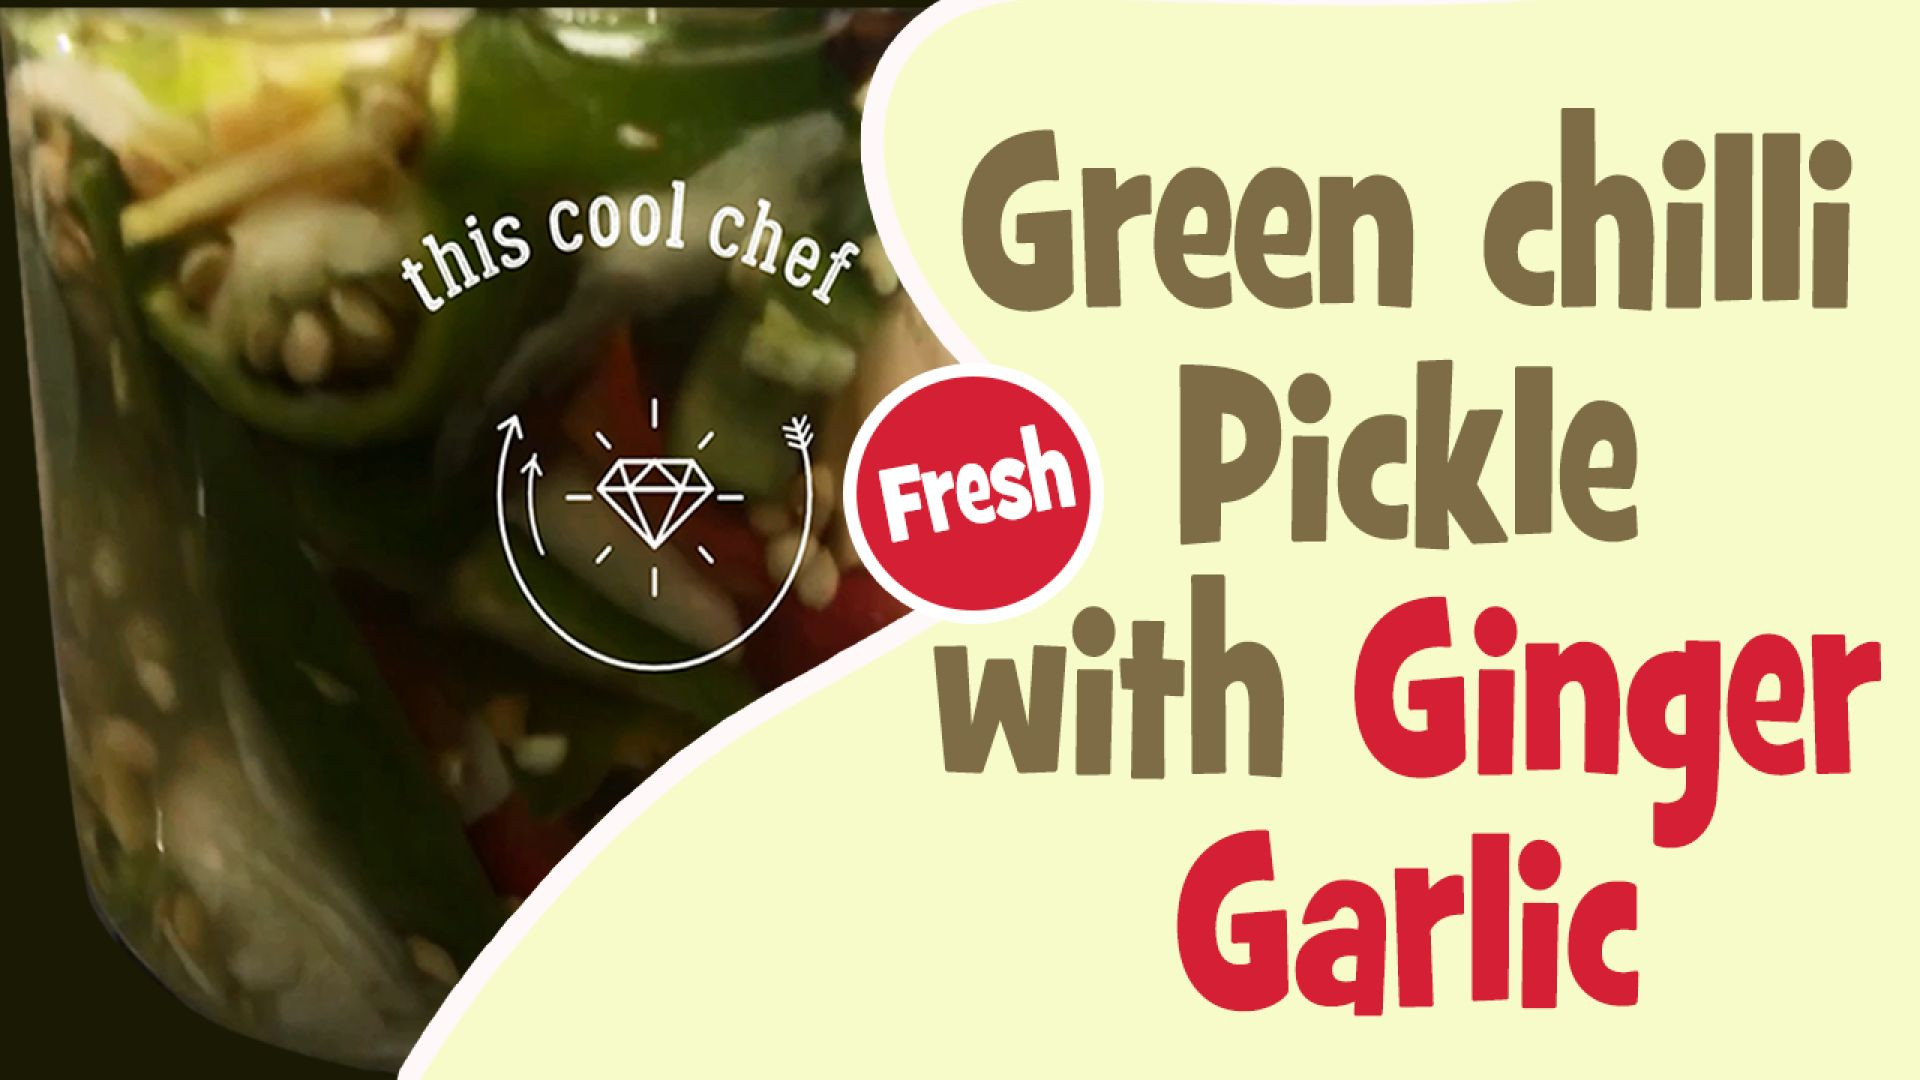 ⁣Green chilly Pickle-This cool chef